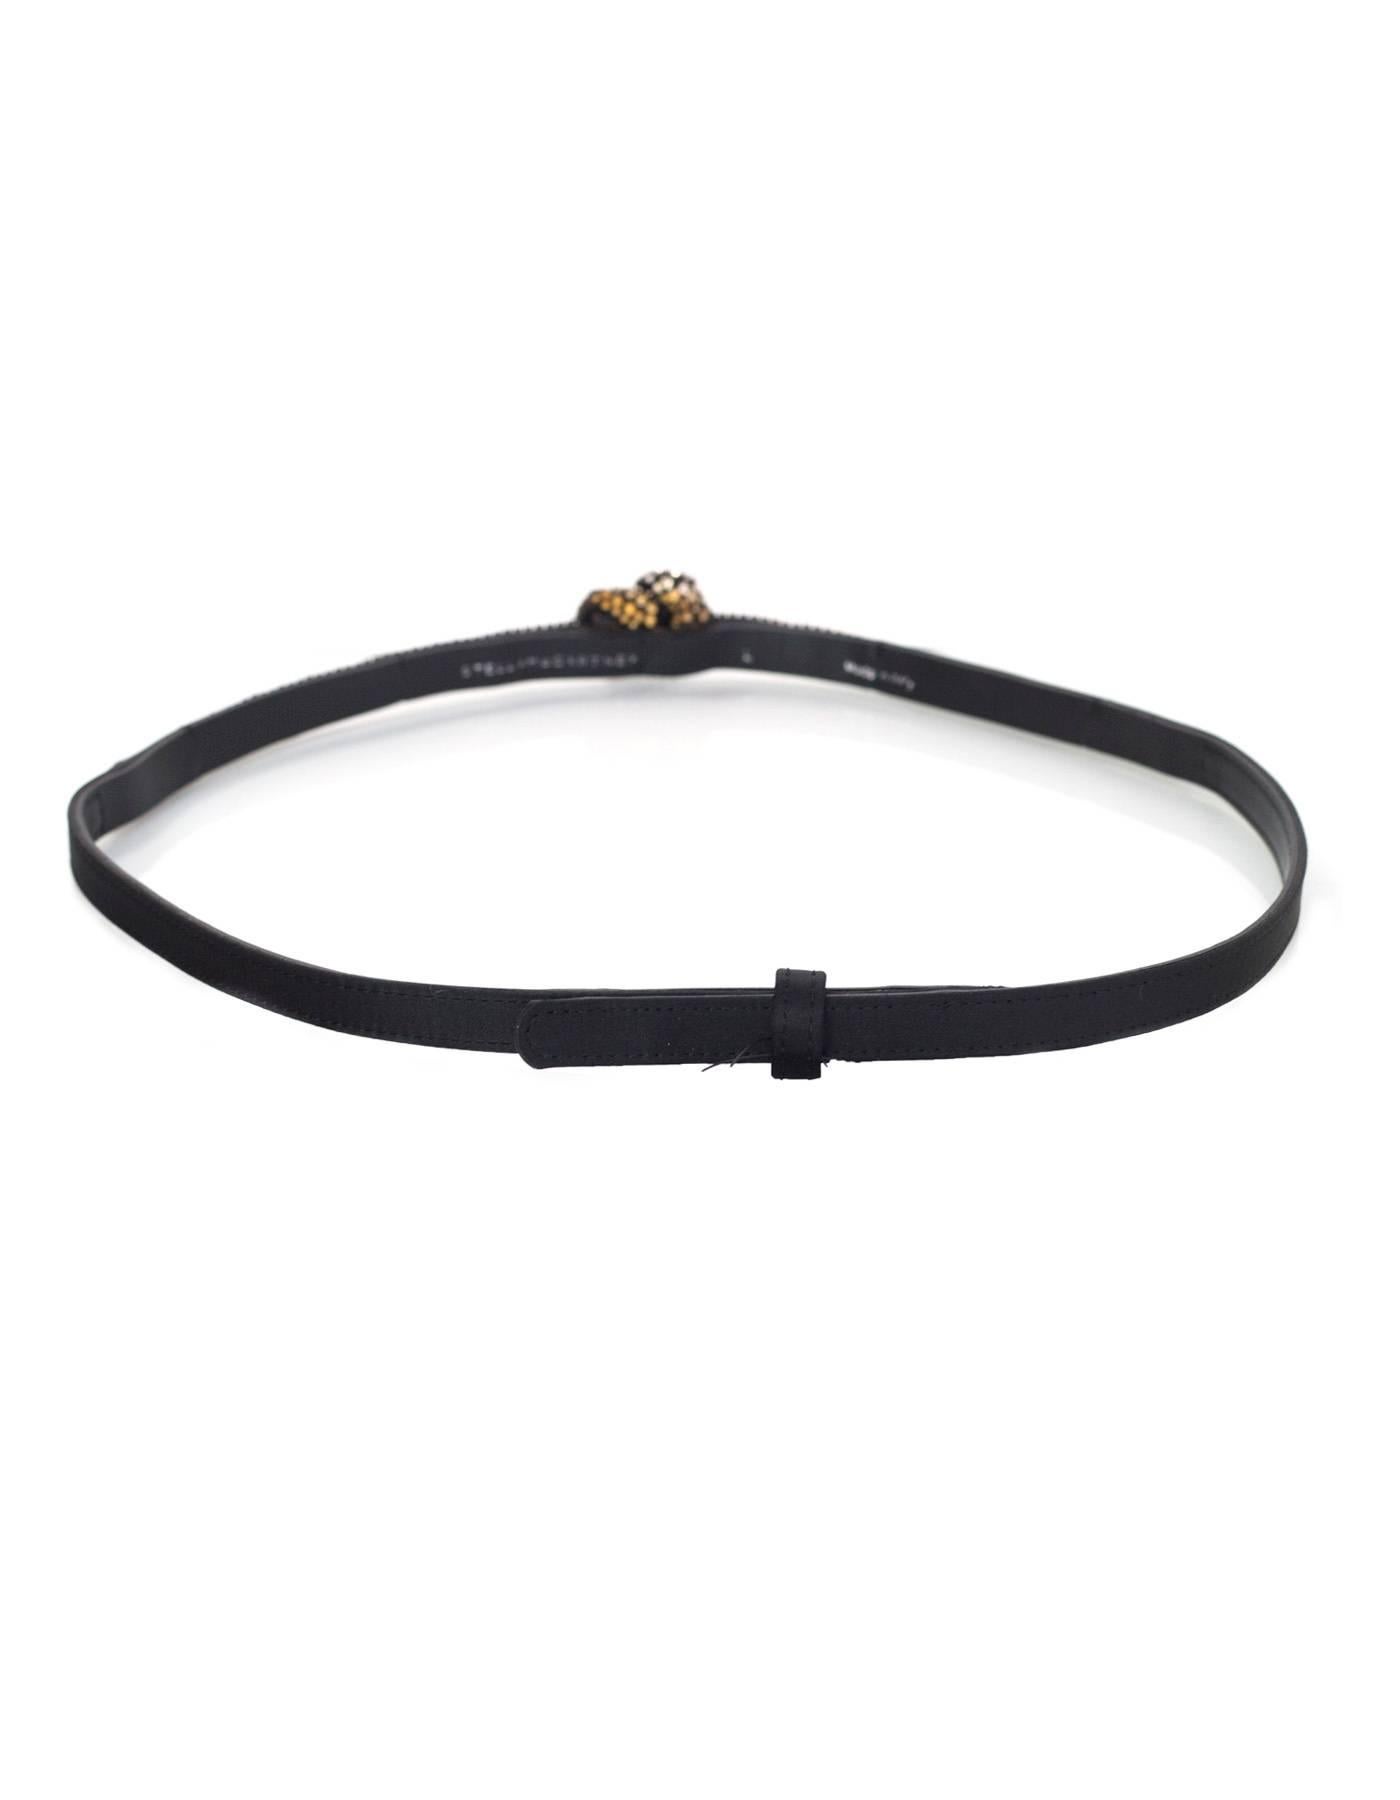 Stella McCartney Black Satin & Crystal Belt sz L In Excellent Condition In New York, NY